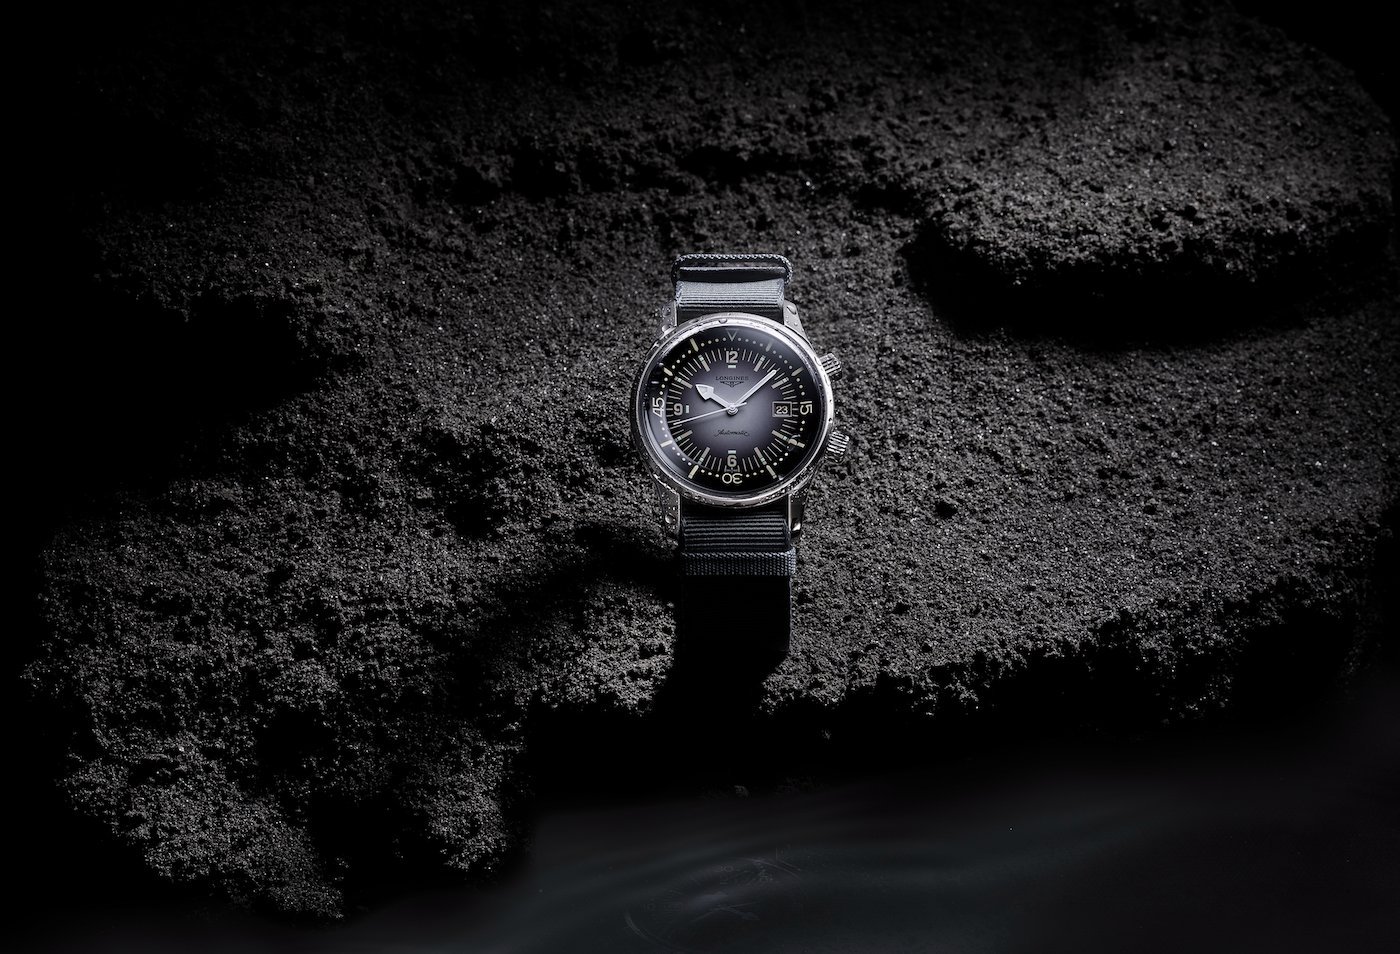 Introducing new versions of The Longines Legend Diver